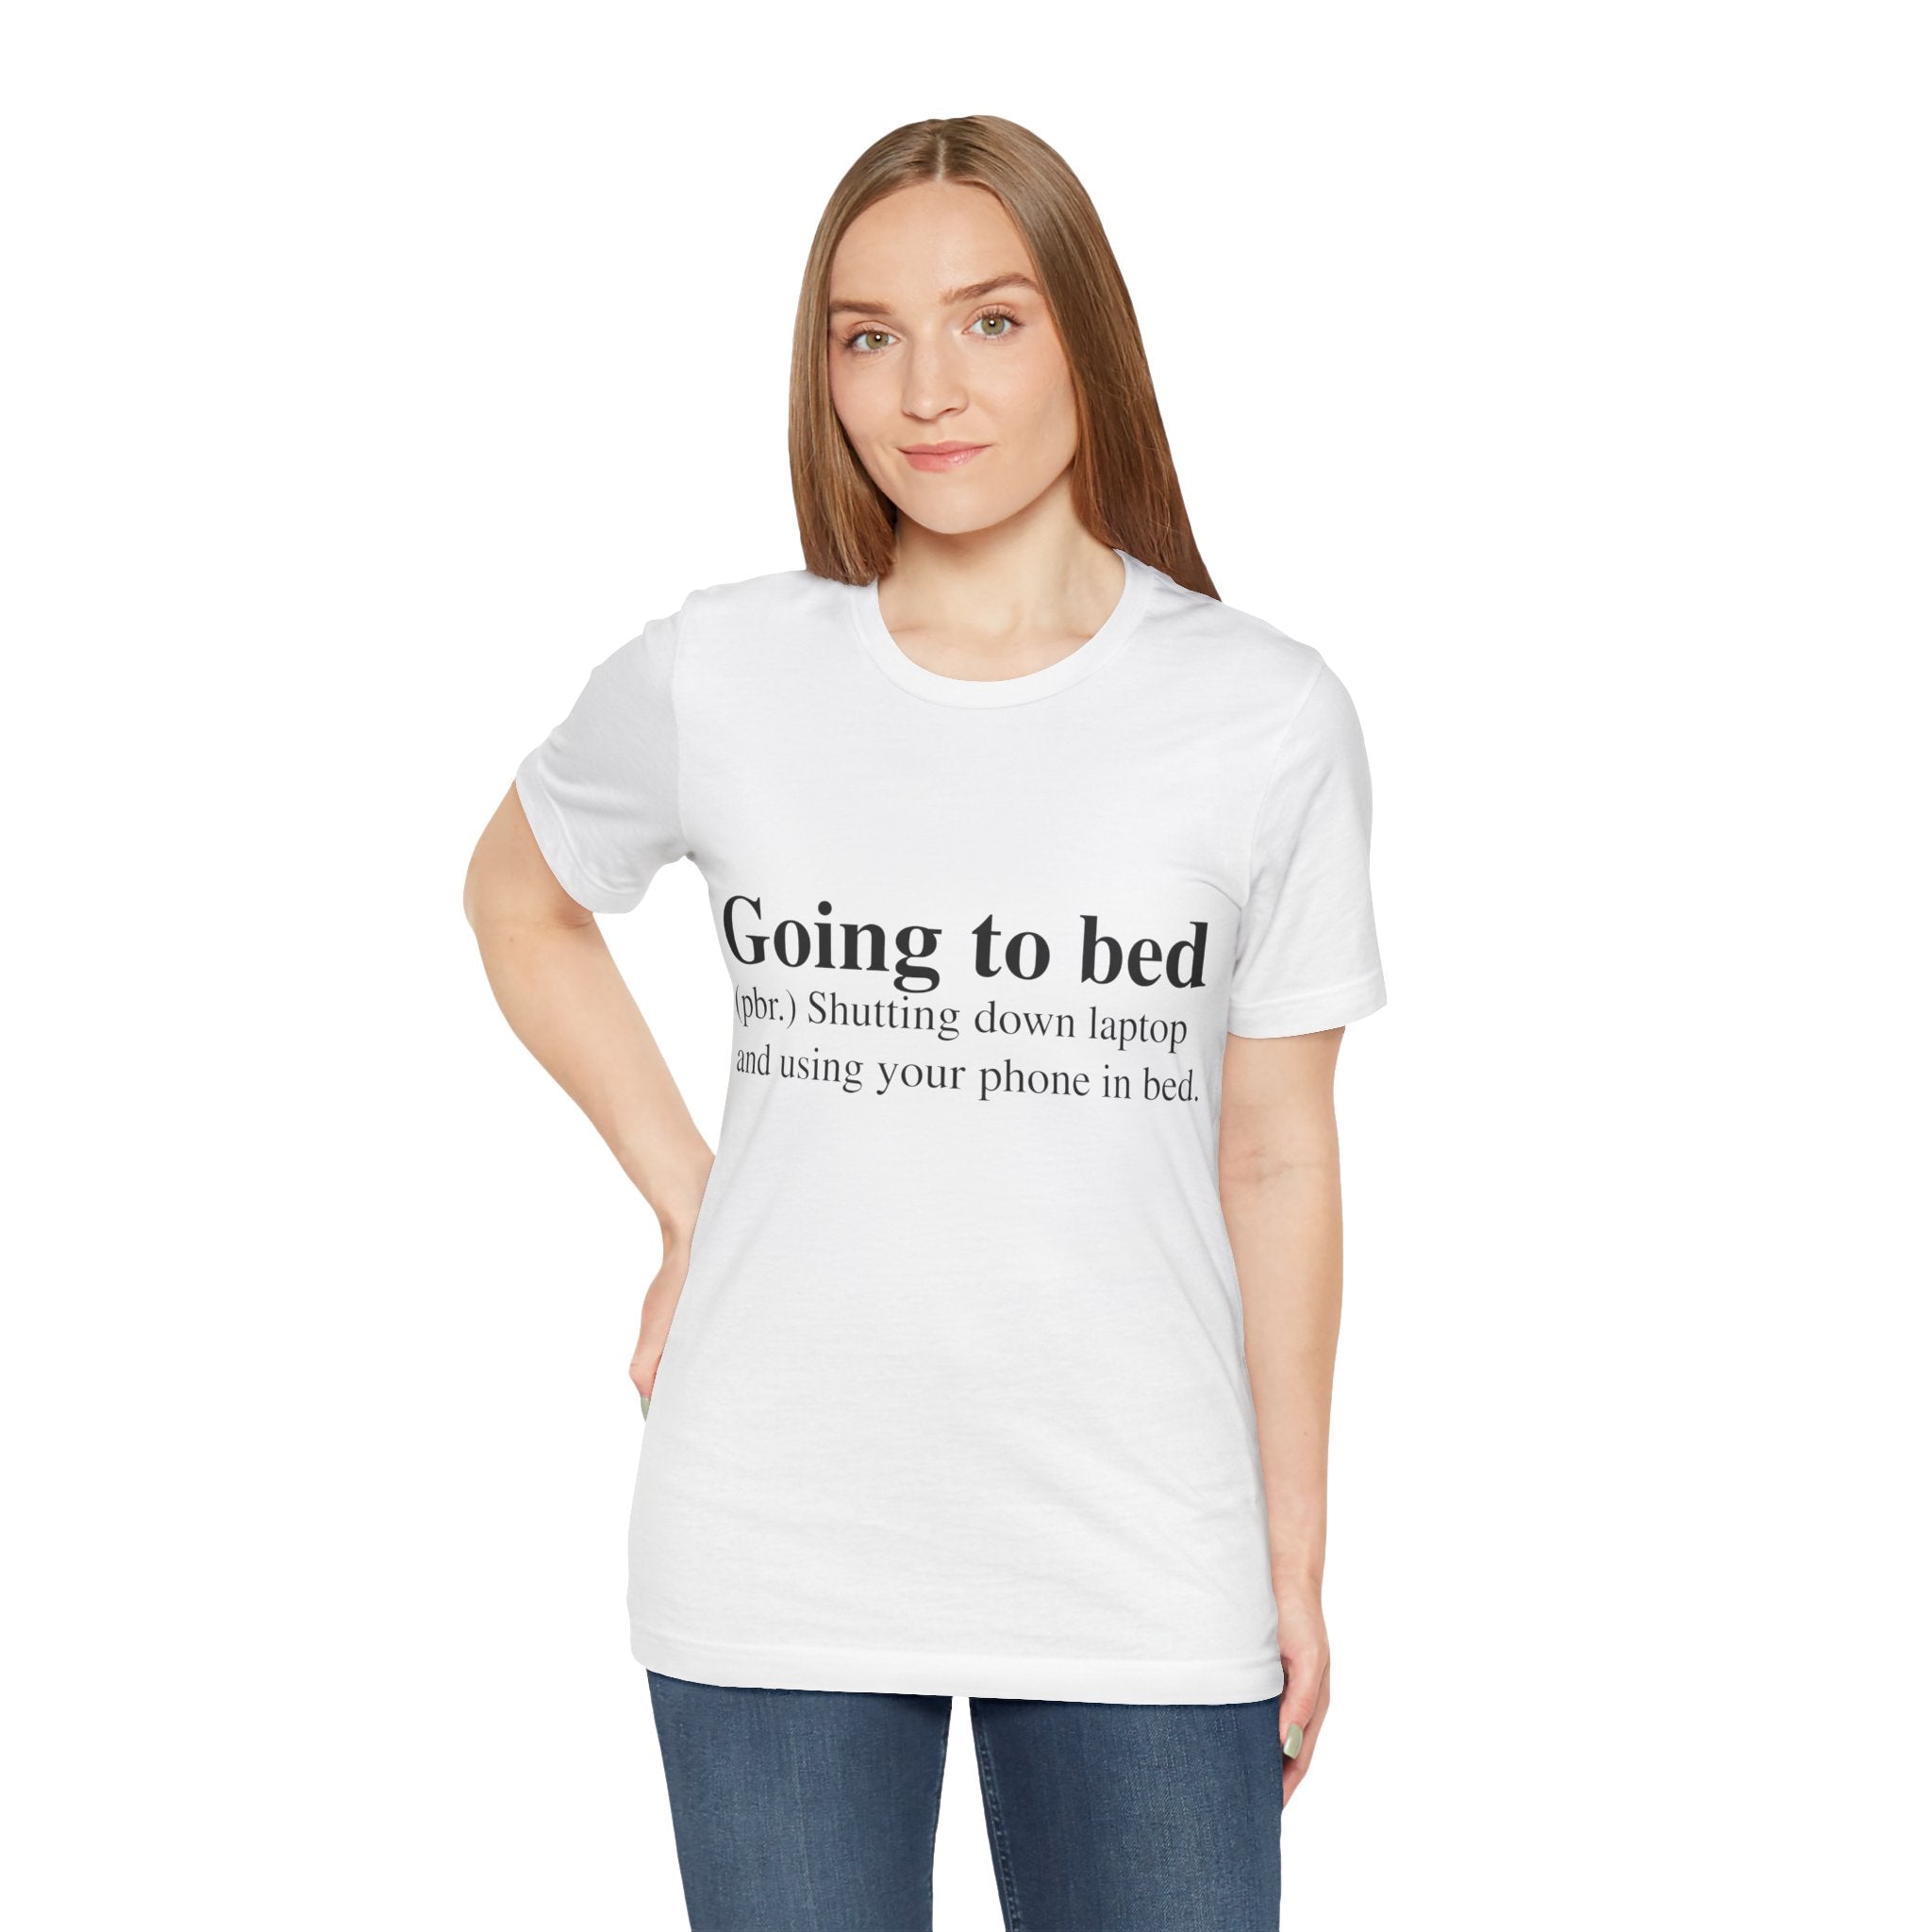 Woman in a white, short sleeve Going to Bed T-shirt standing against a plain background.